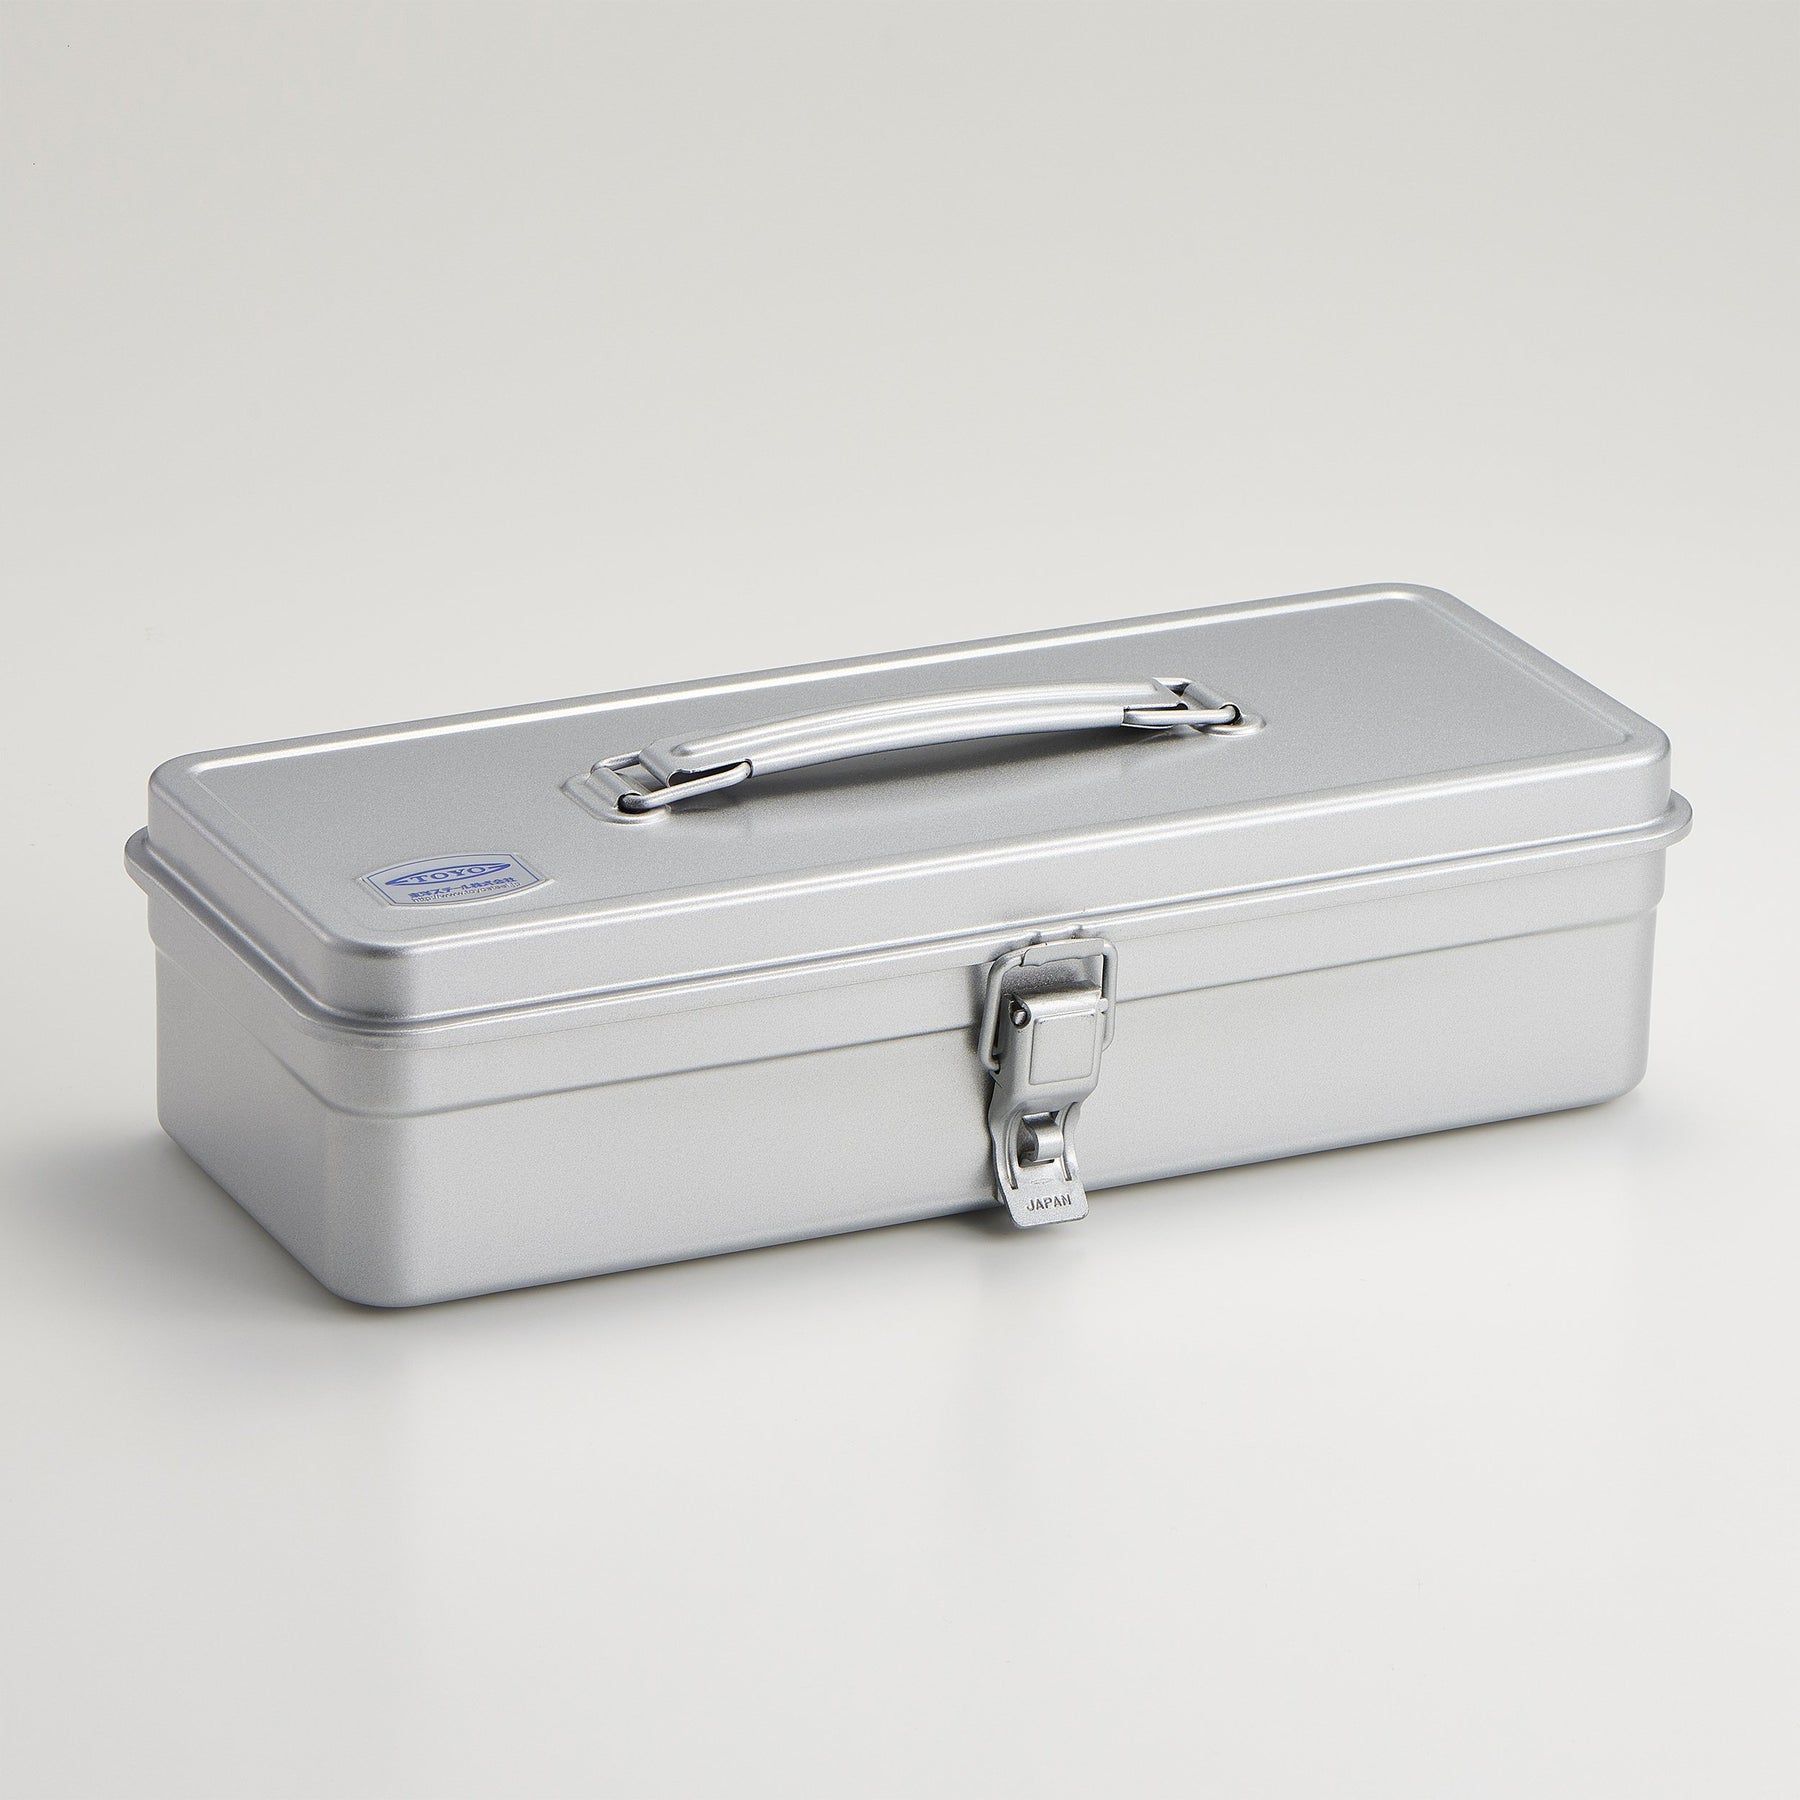 AMEICO - Official US Distributor of Toyo - Steel Toolbox T-320